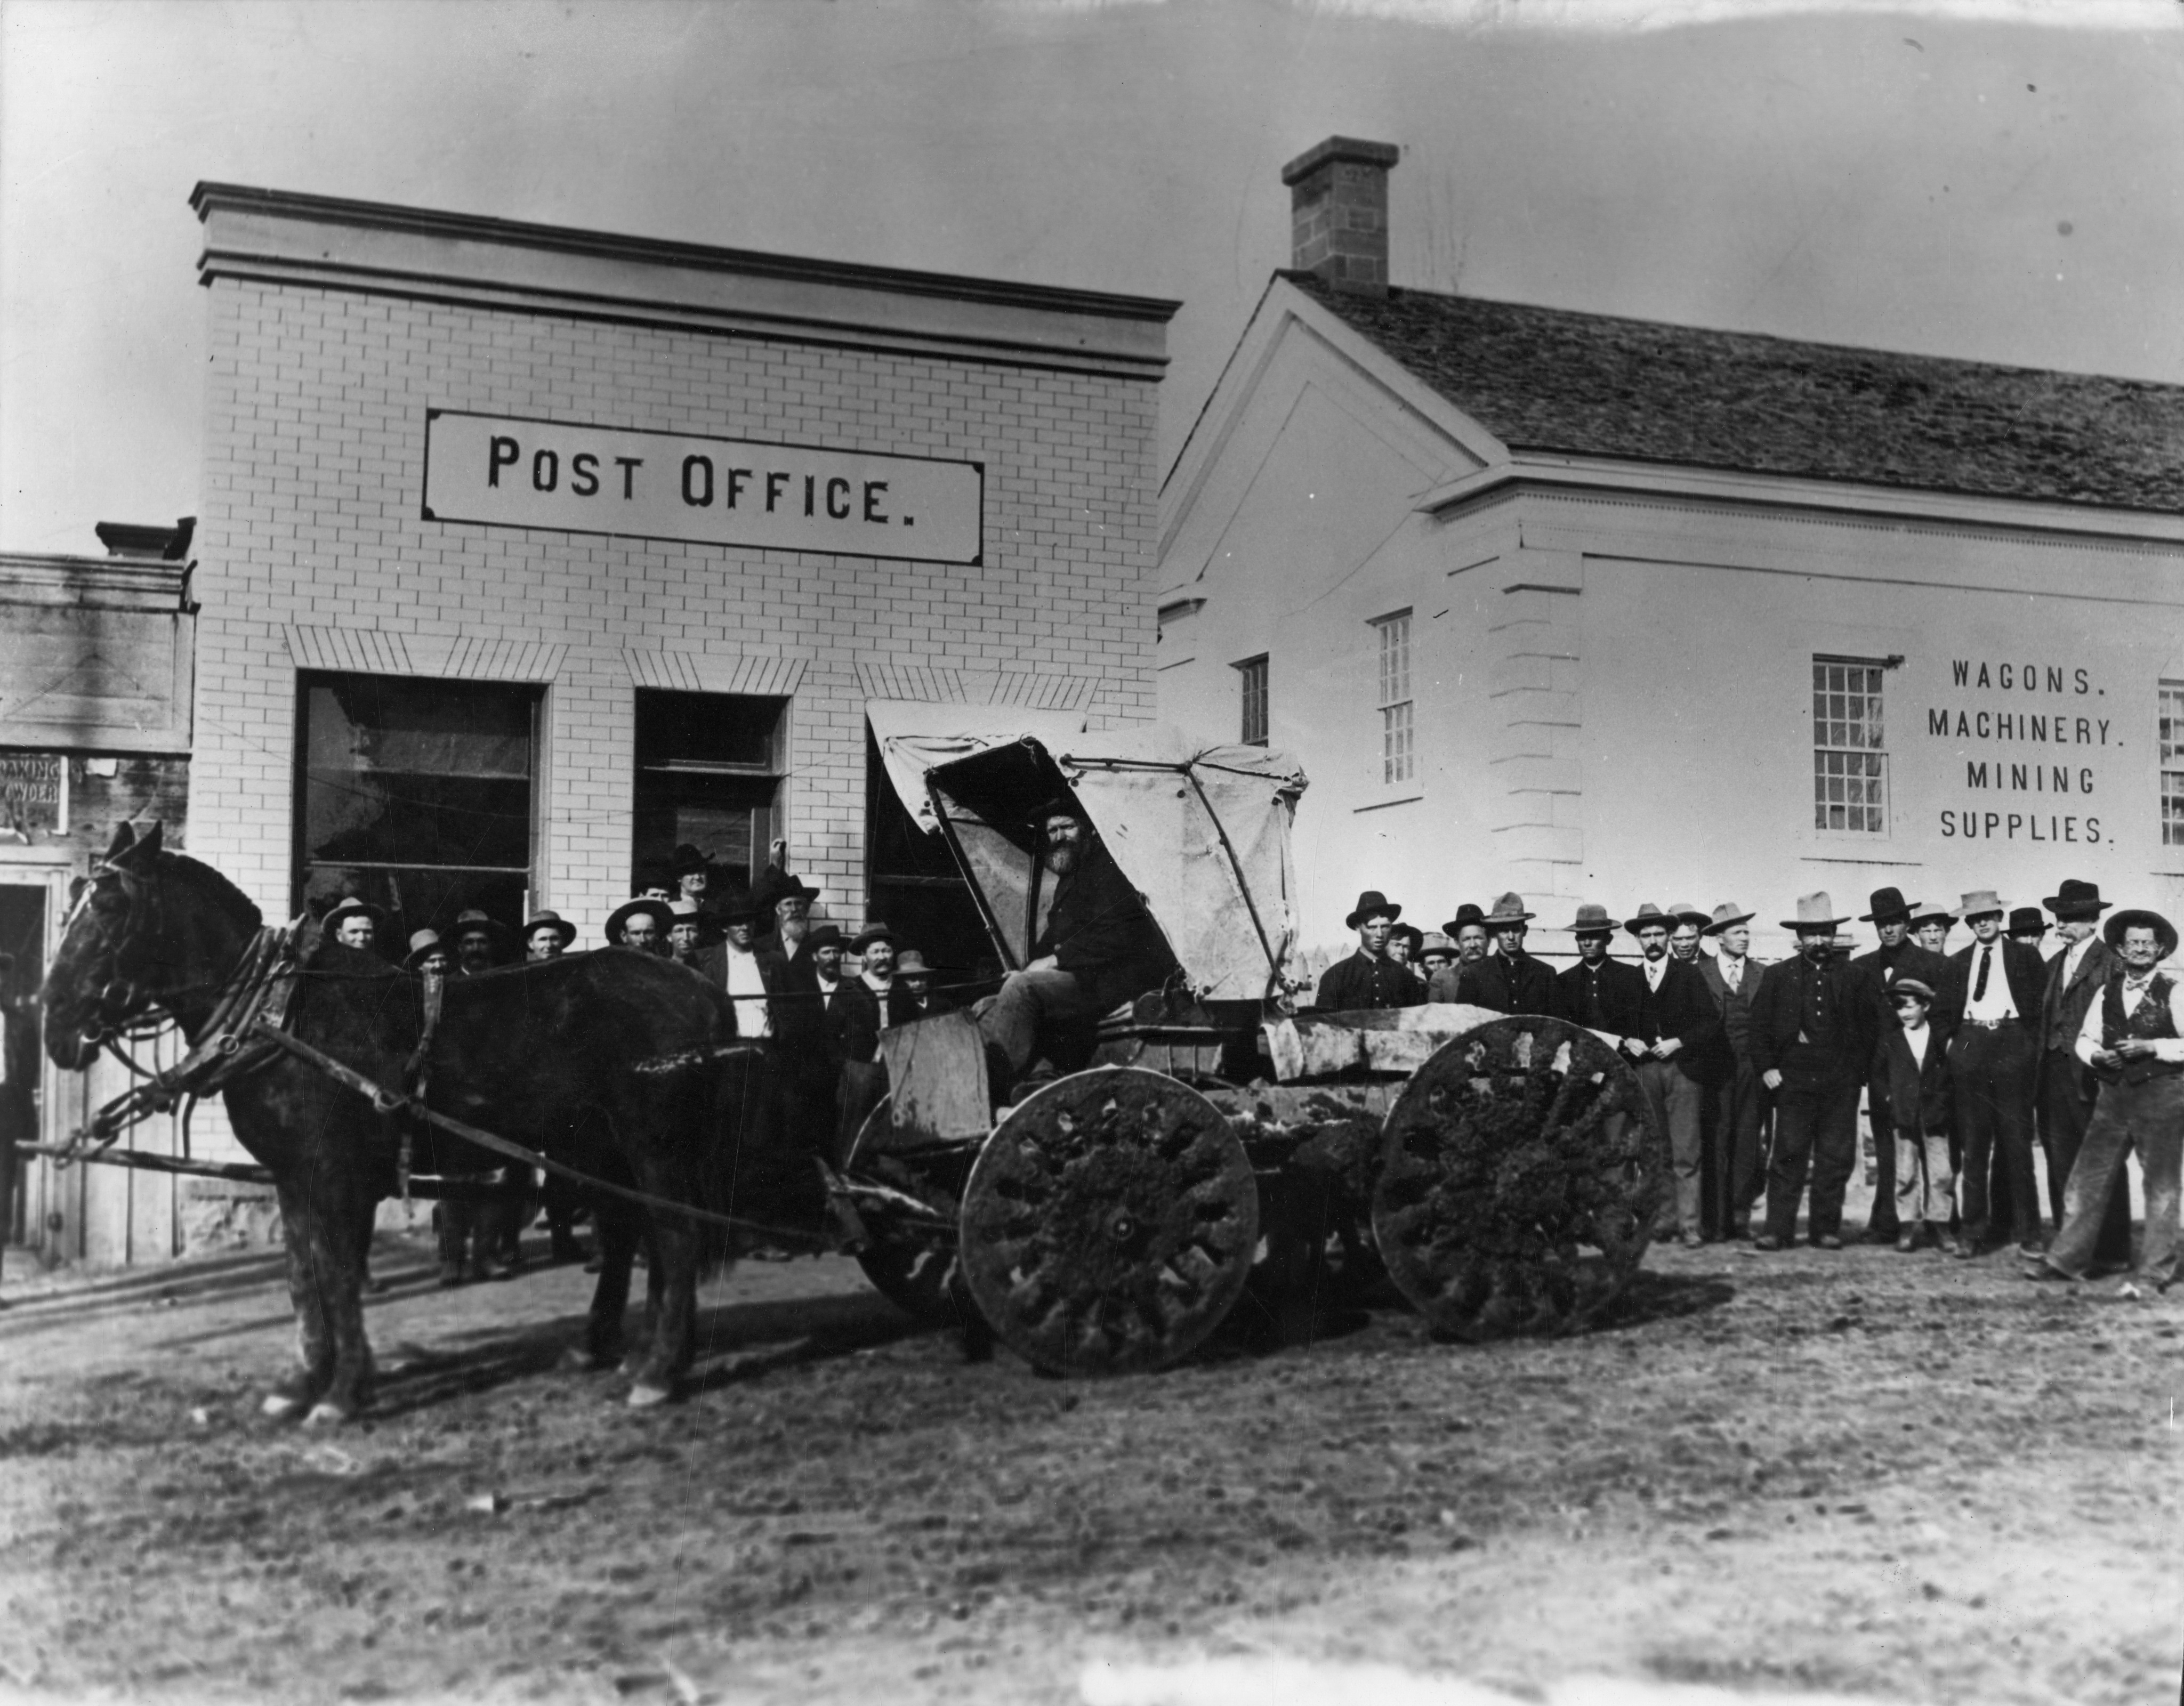 A wagon and people in front of the old Post Office on Main Street in St. George